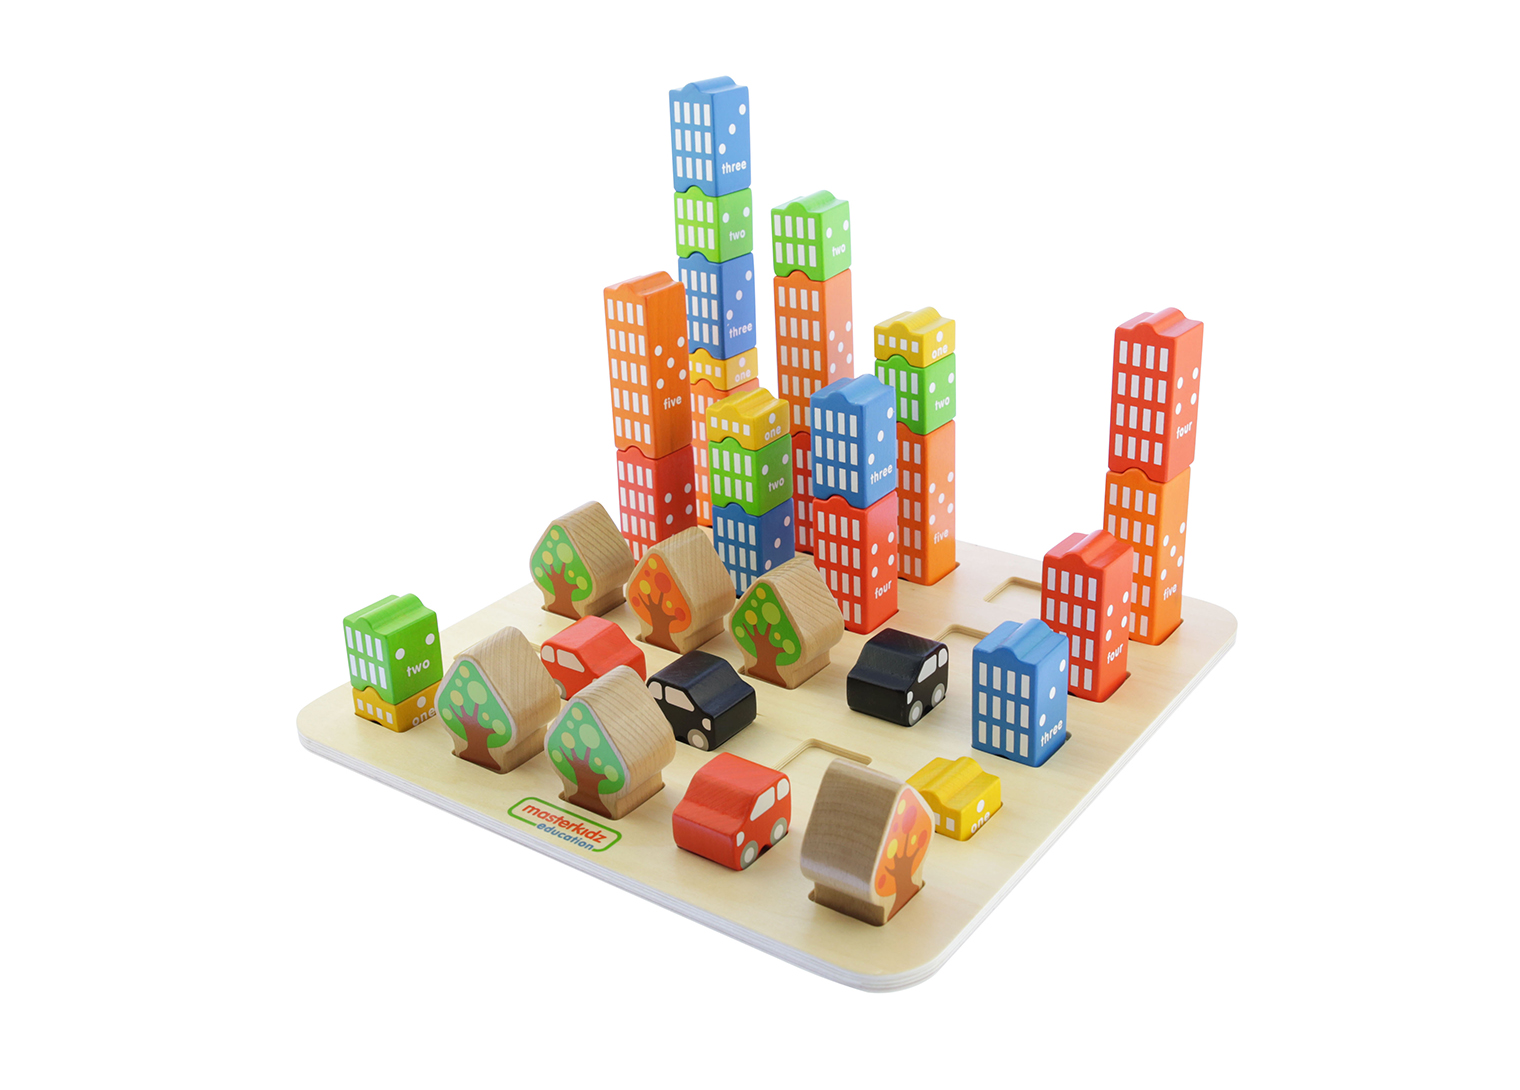 Tiny City -  A Spatial Relationship Learning Game